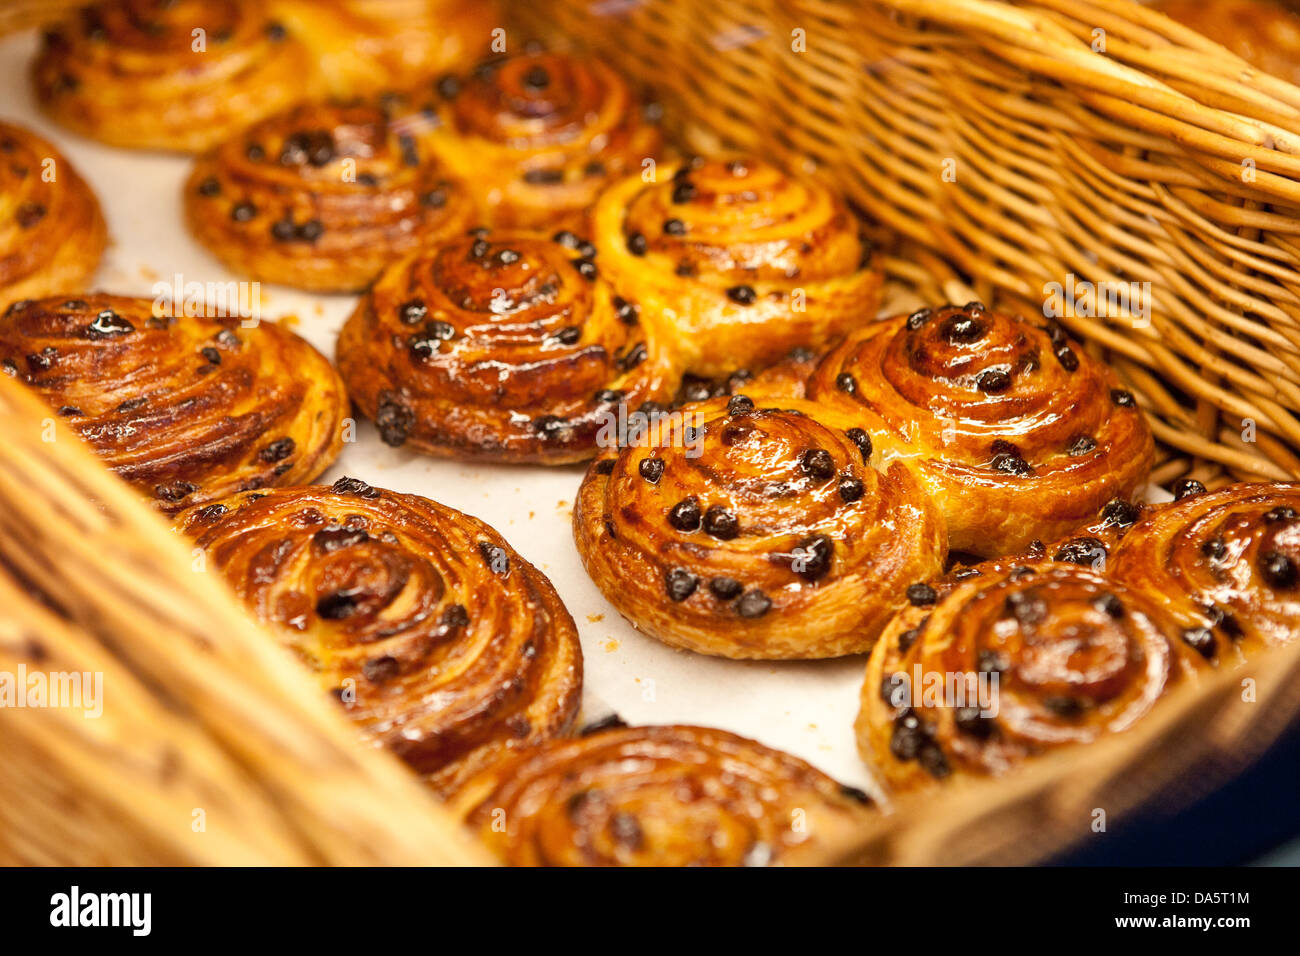 Buns with raisins in the basket Stock Photo